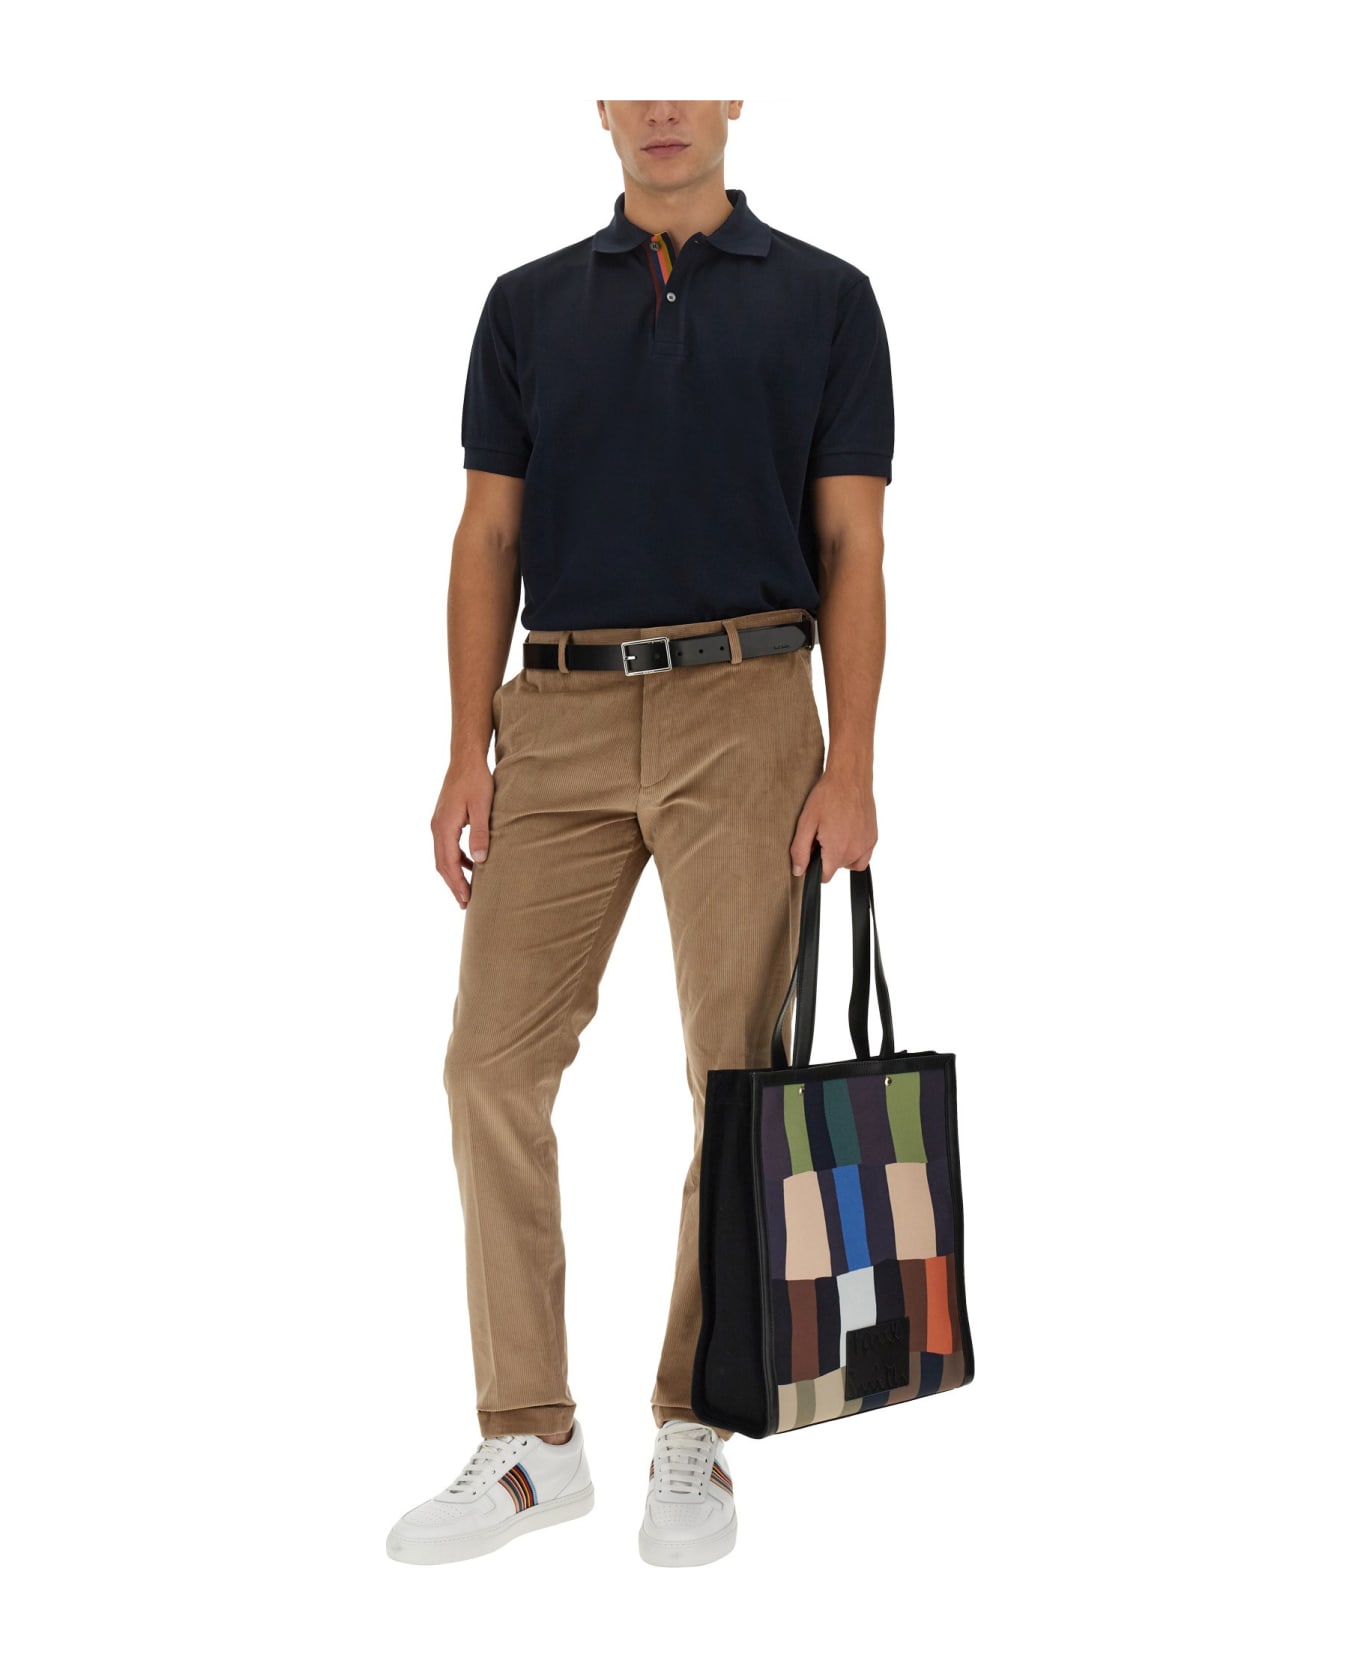 Paul Smith Regular Fit Polo Shirt - Blue ポロシャツ